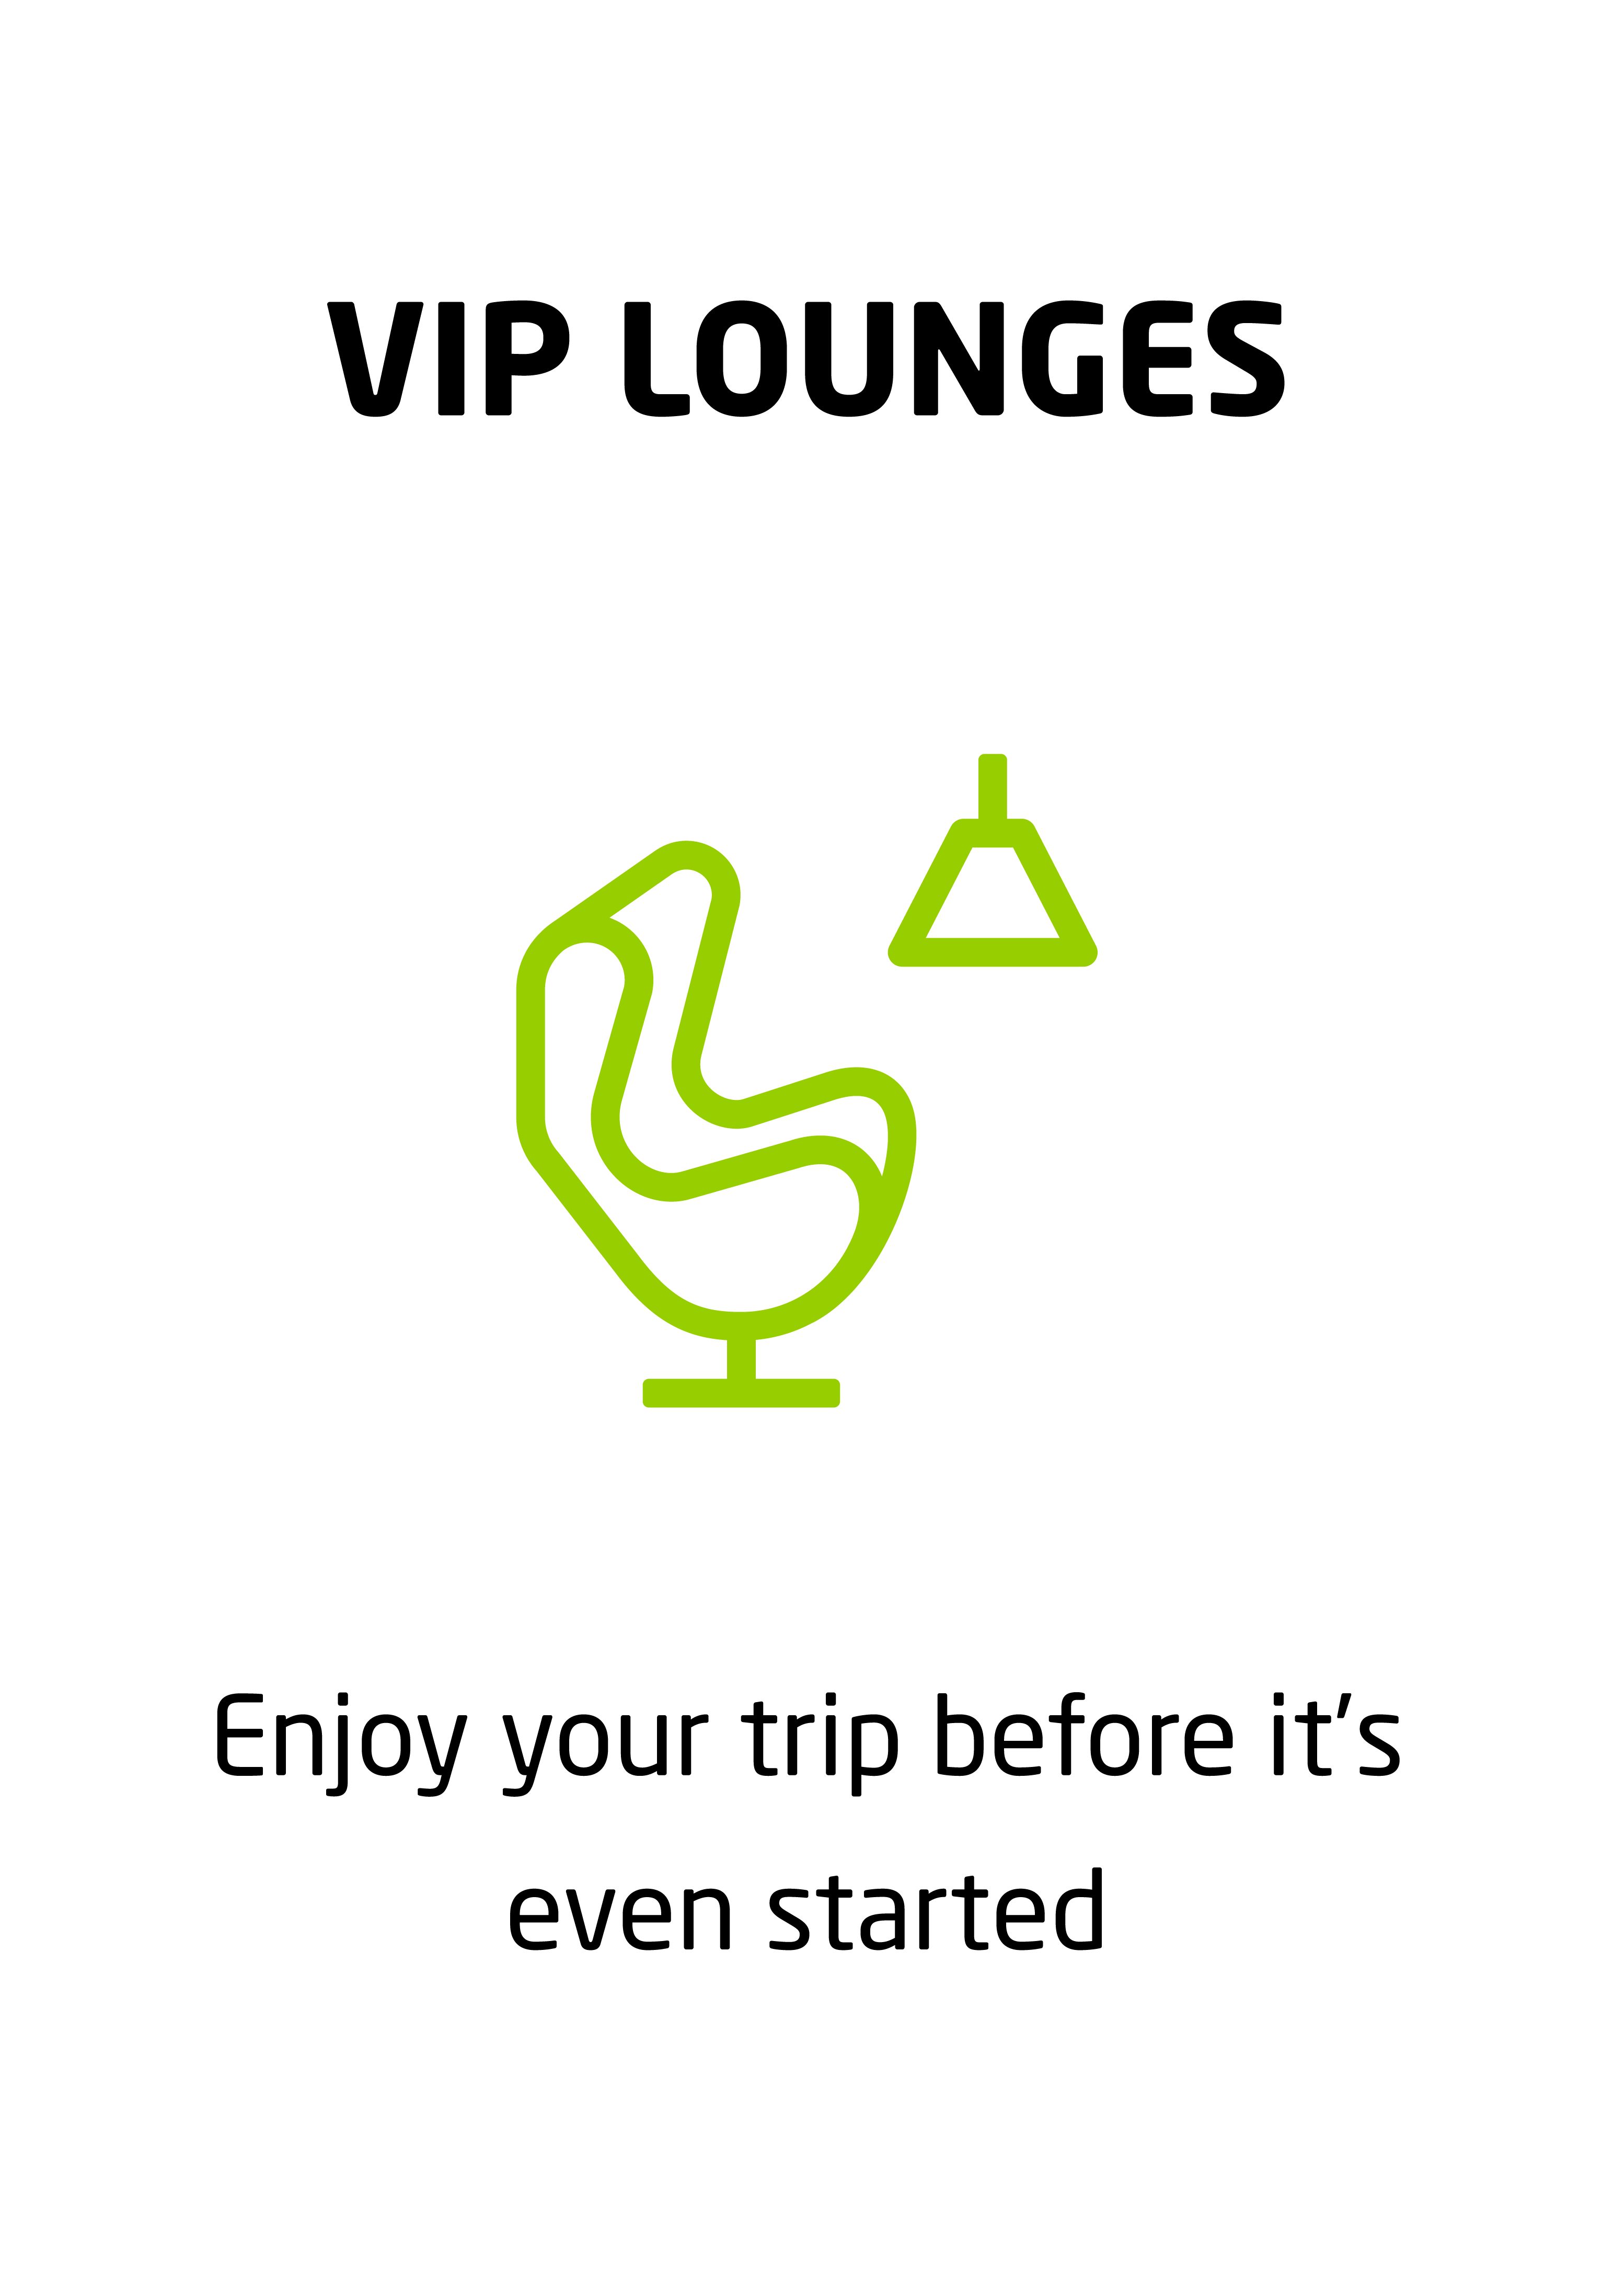 VIP lounges